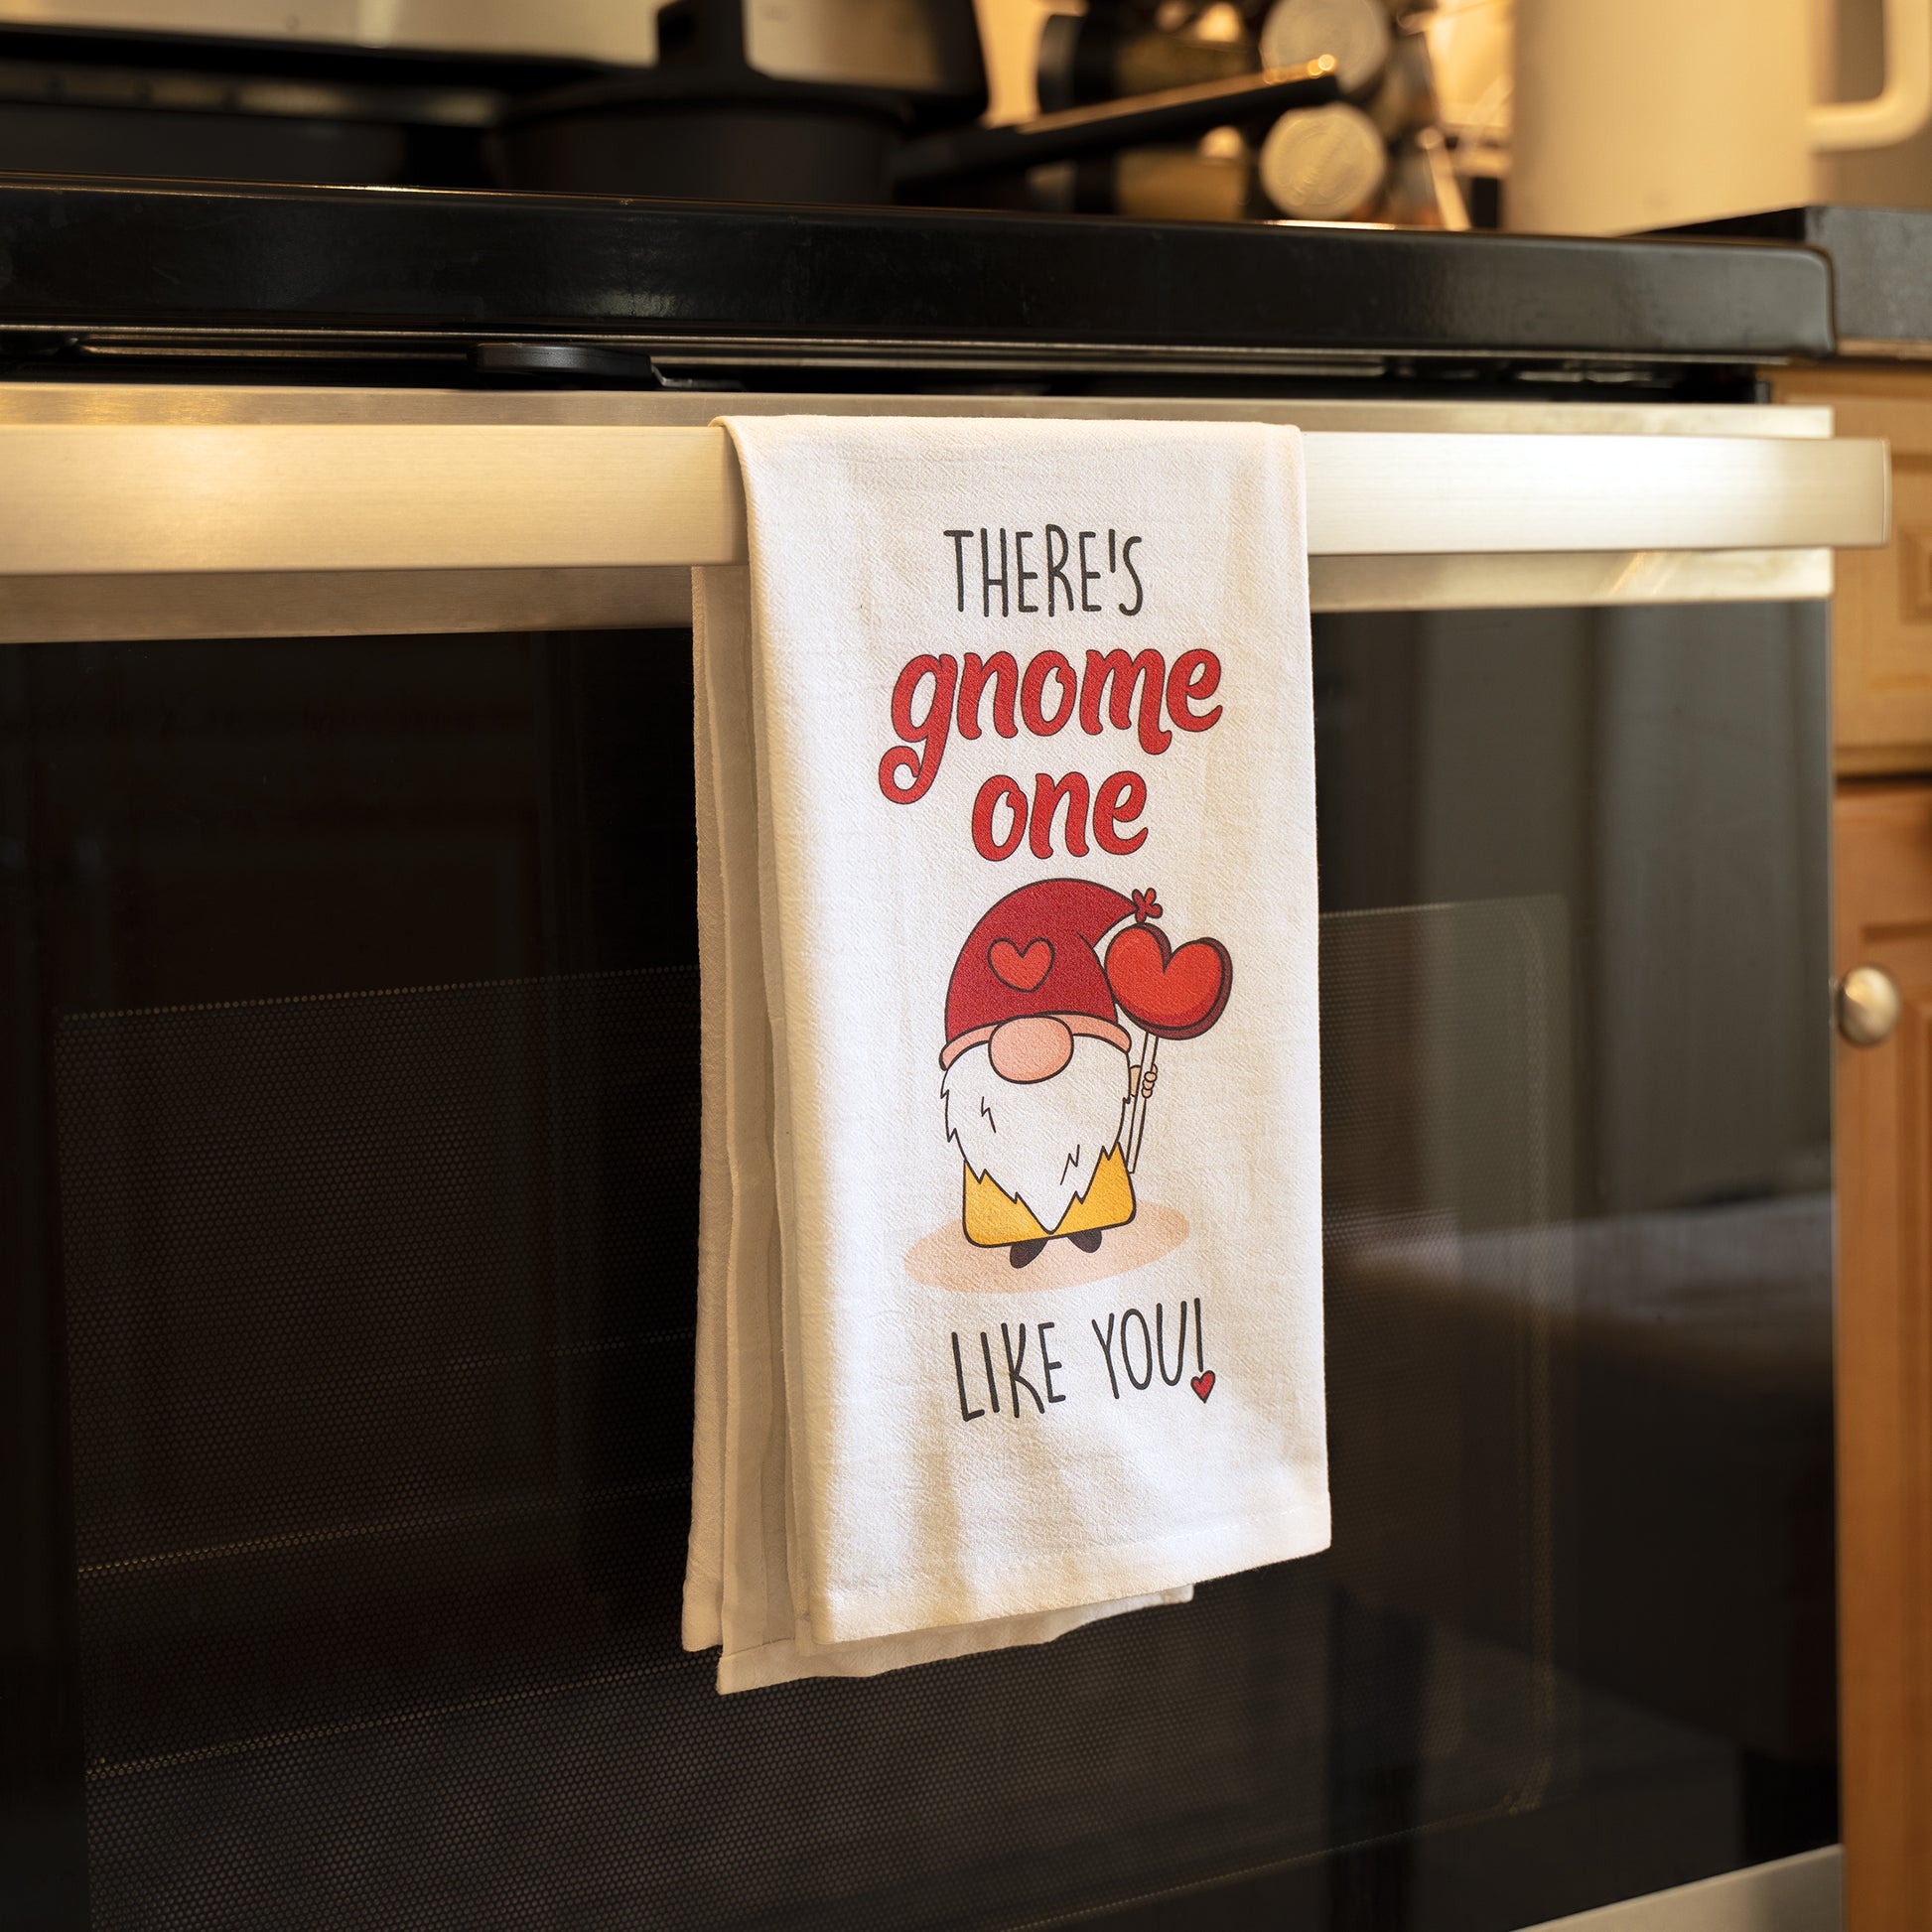 100% Cotton Kitchen Towels Printed with Cute Kitchen Sayings 'Life is Short